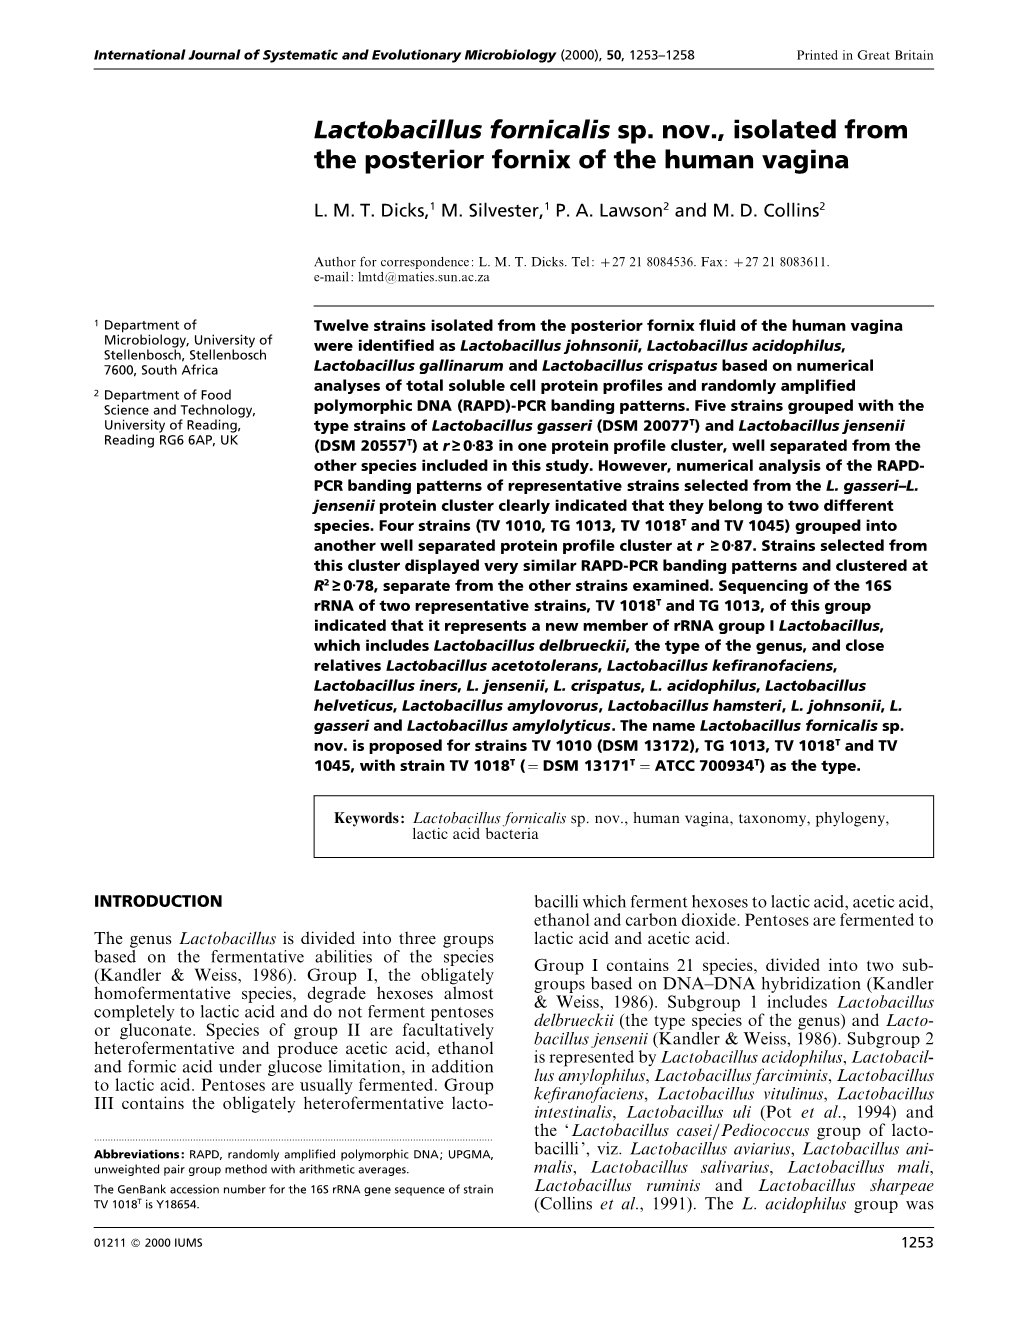 Lactobacillus Fornicalis Sp. Nov., Isolated from the Posterior Fornix of the Human Vagina